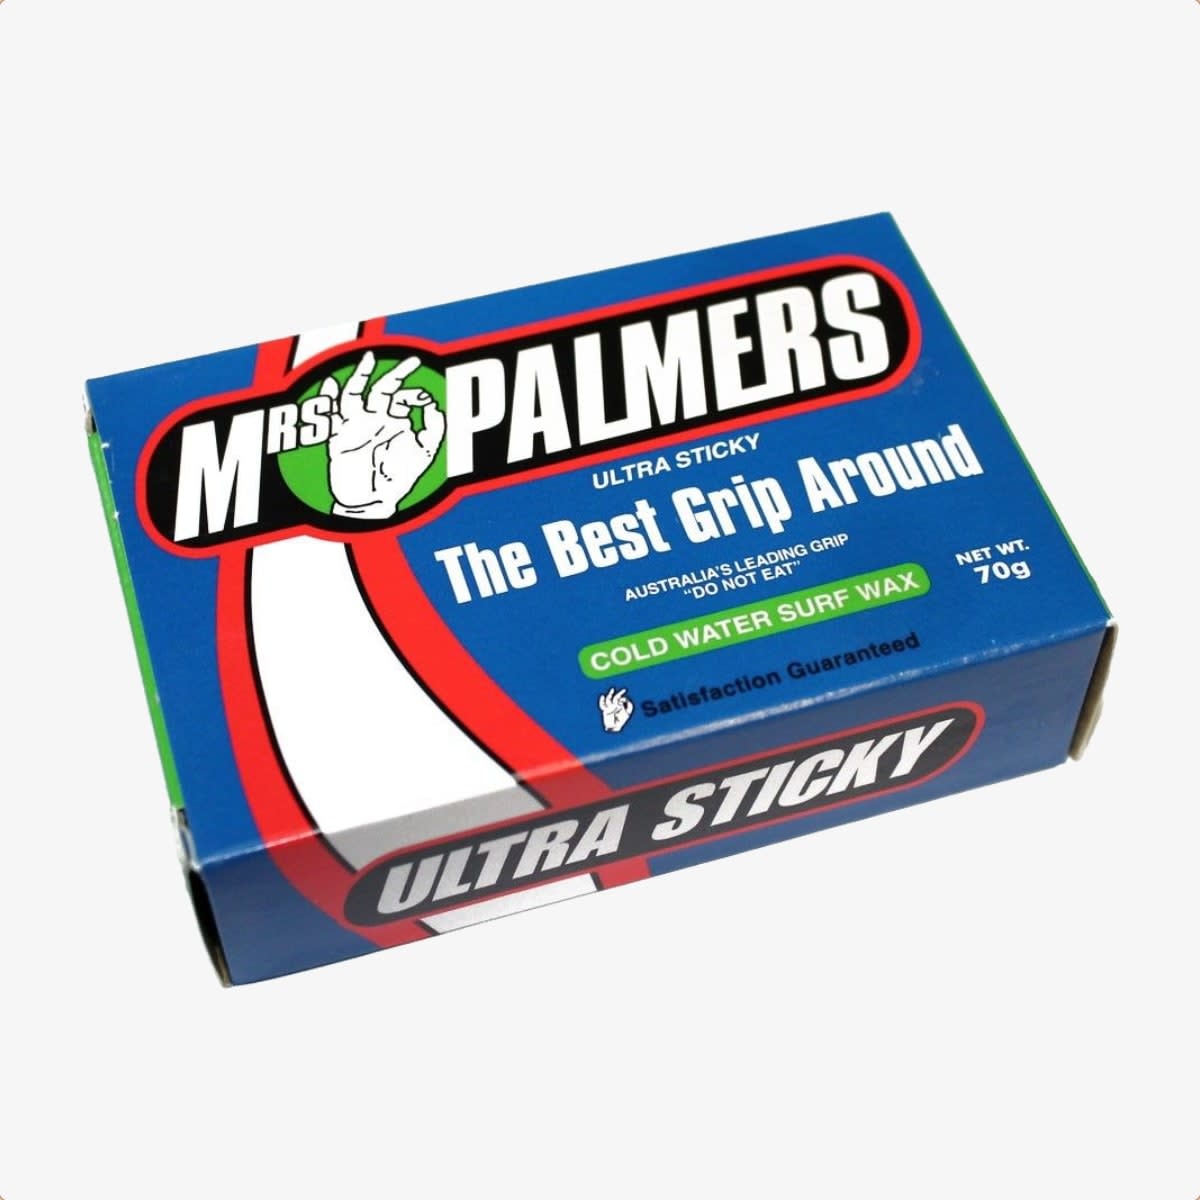 Mrs Palmers Cold Water Surf Wax 3 Pack 